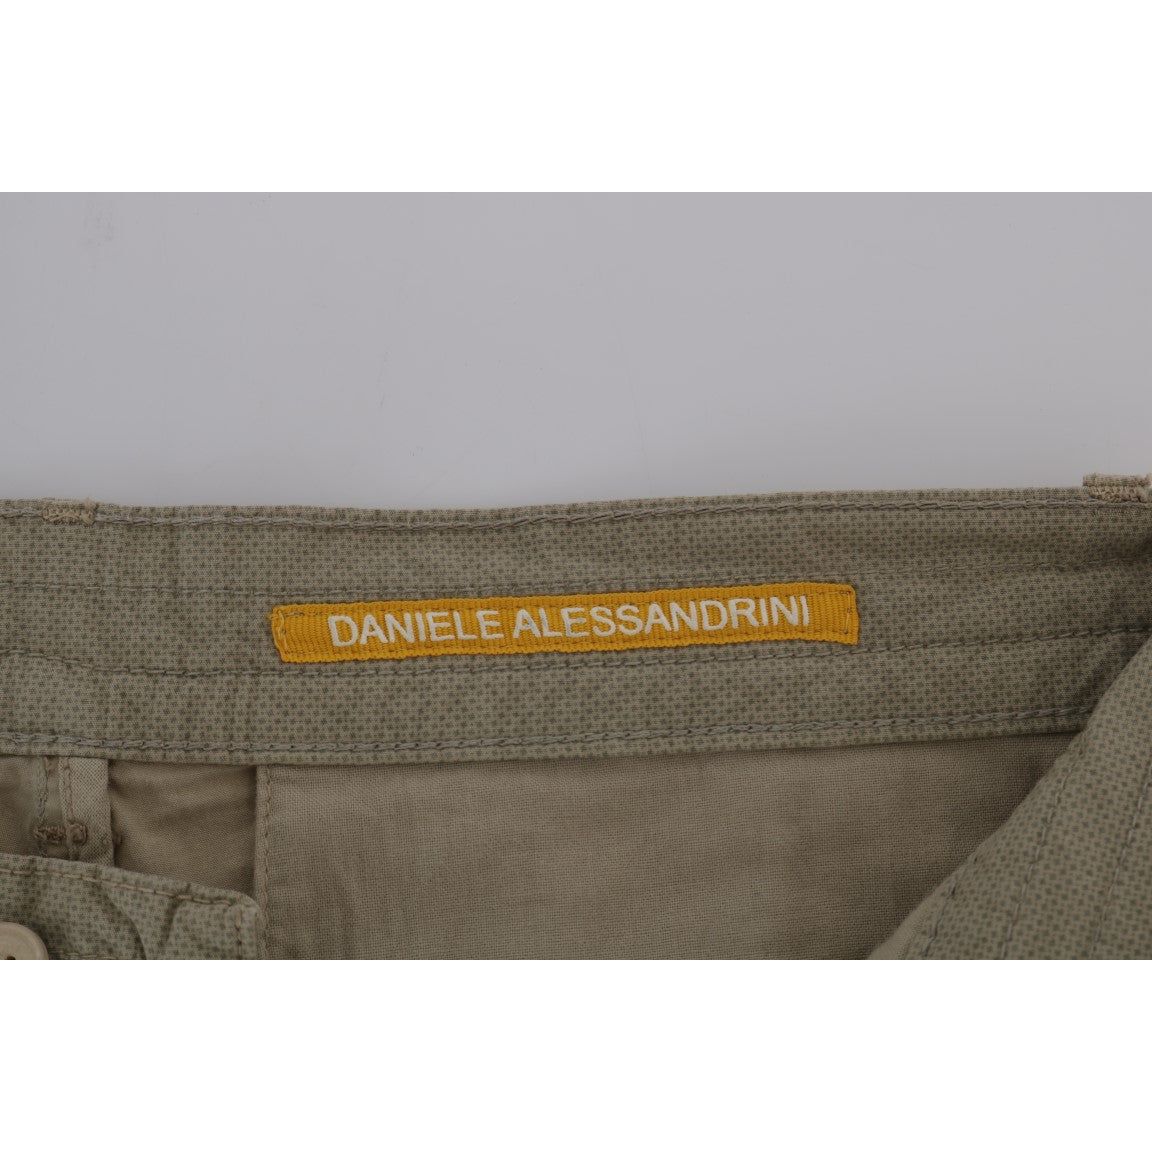 Daniele Alessandrini Beige Slim Fit Chinos for Sophisticated Style Jeans & Pants beige-cotton-stretch-slim-fit-chinos 457192-beige-cotton-stretch-slim-fit-chinos-4.jpg